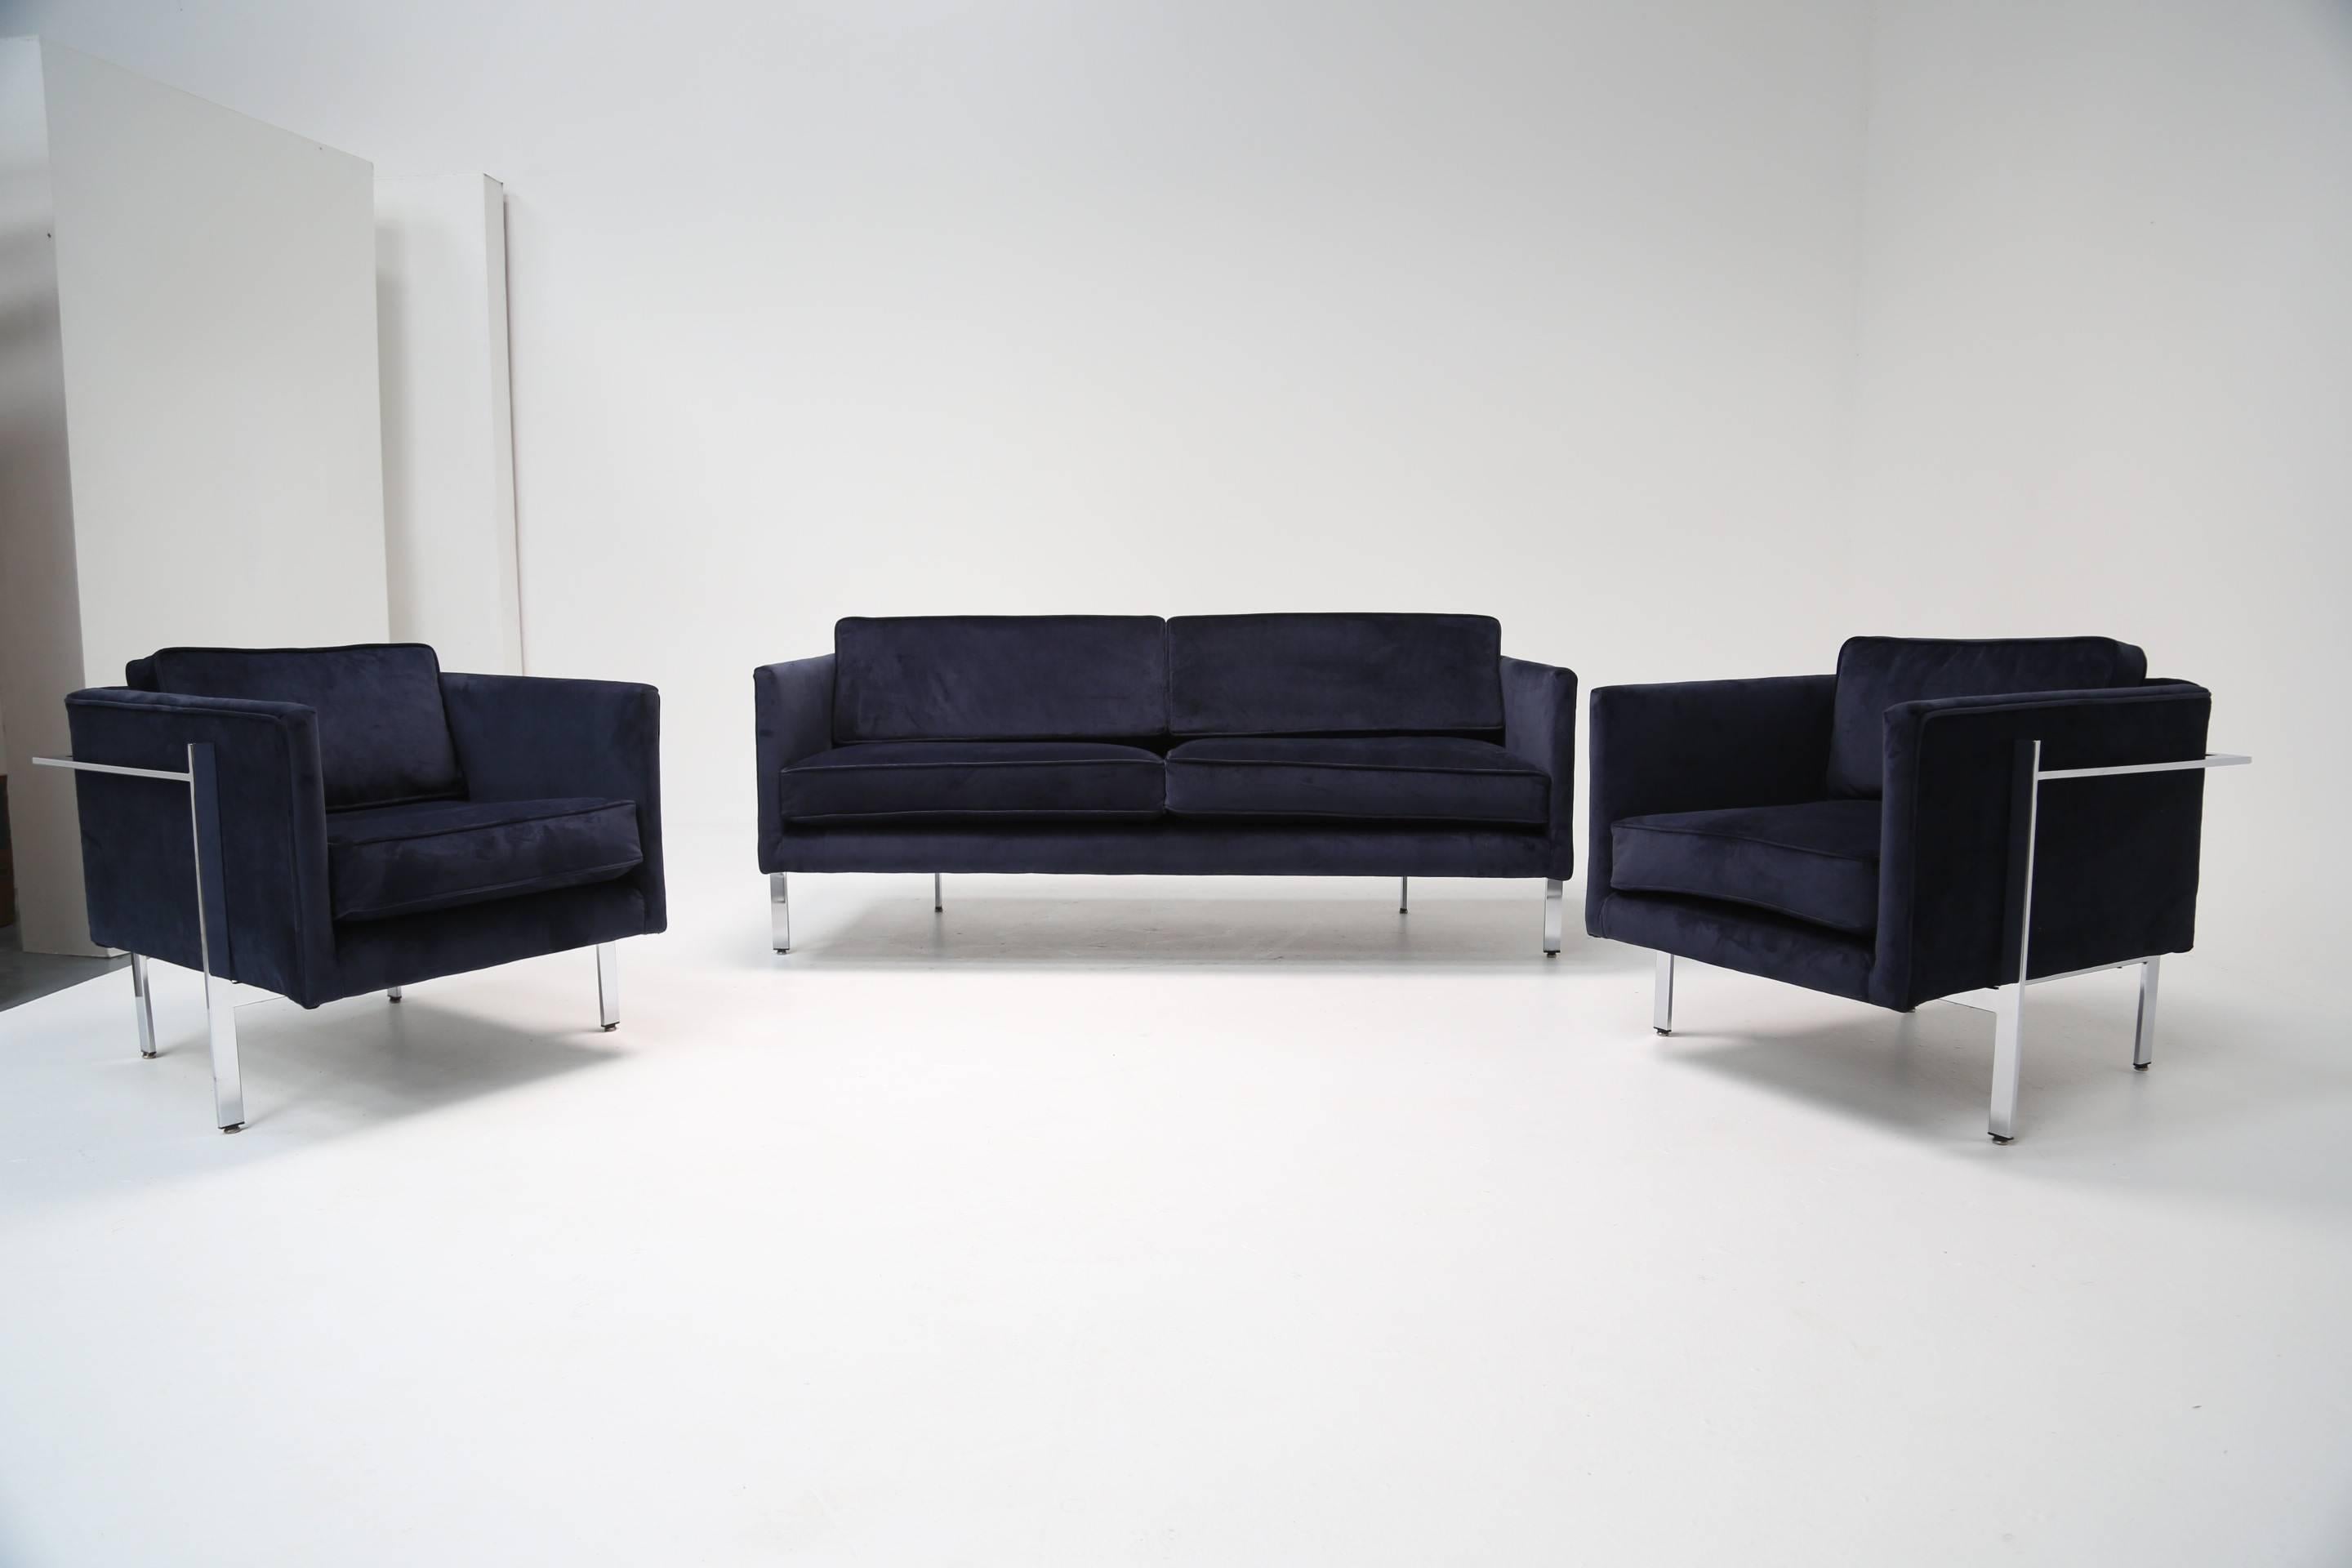 This stylish and elegant chrome framed two-seat sofa with a matching pair of armchairs is newly upholstered in a beautiful navy blue velvet. No labels but it is known as a 